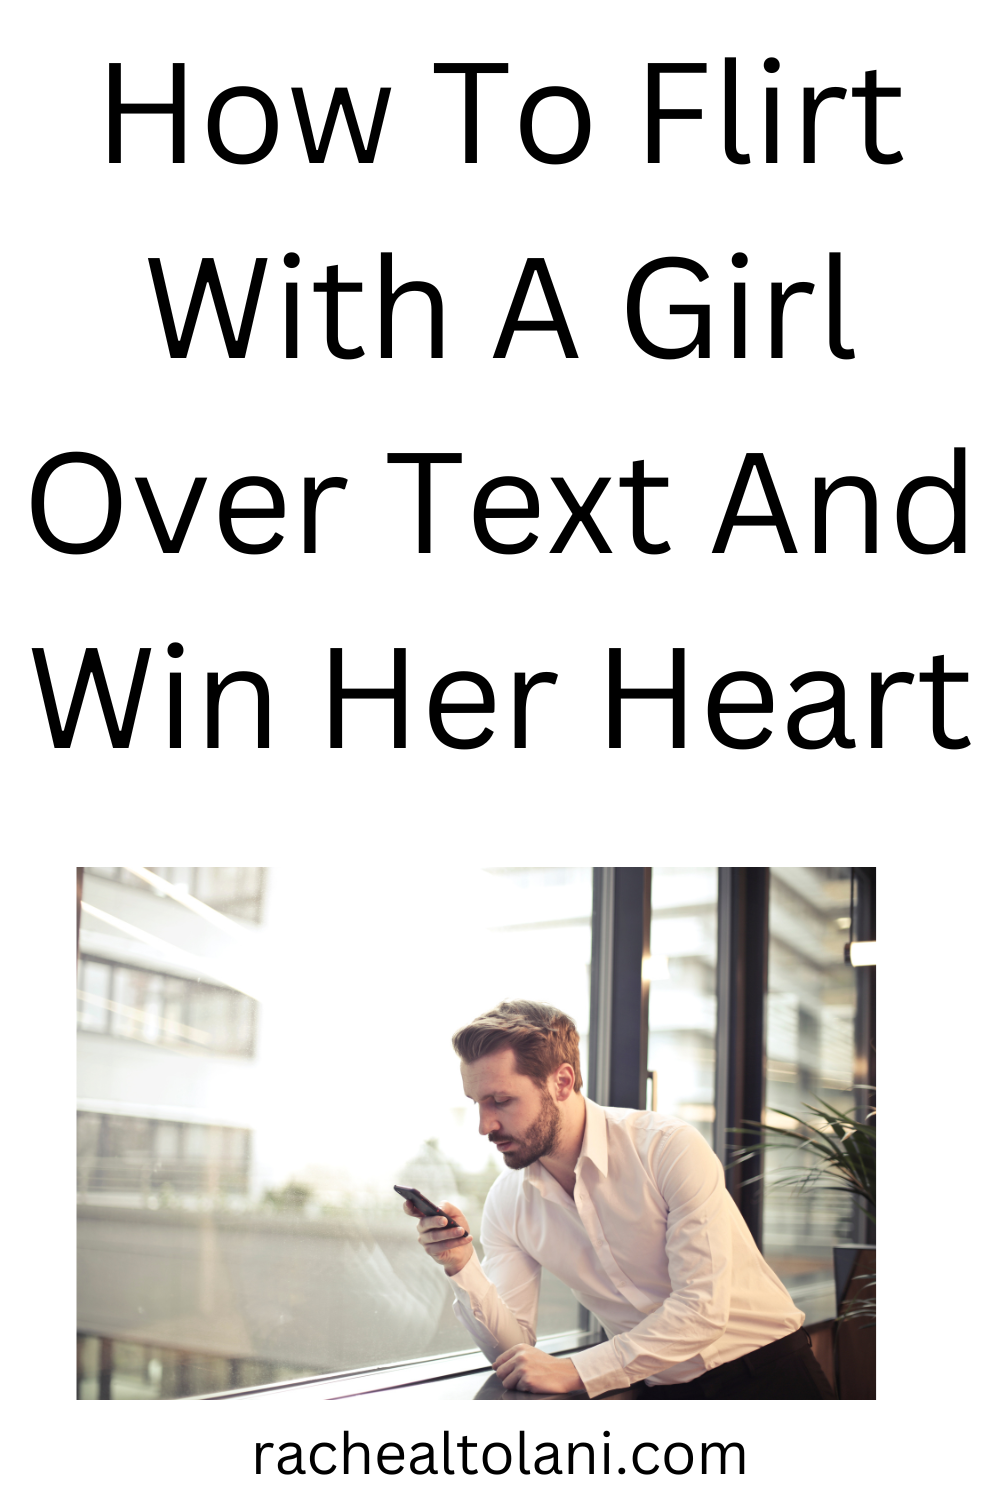 How To Flirt With A Girl Over Text And Win Her Heart 9113